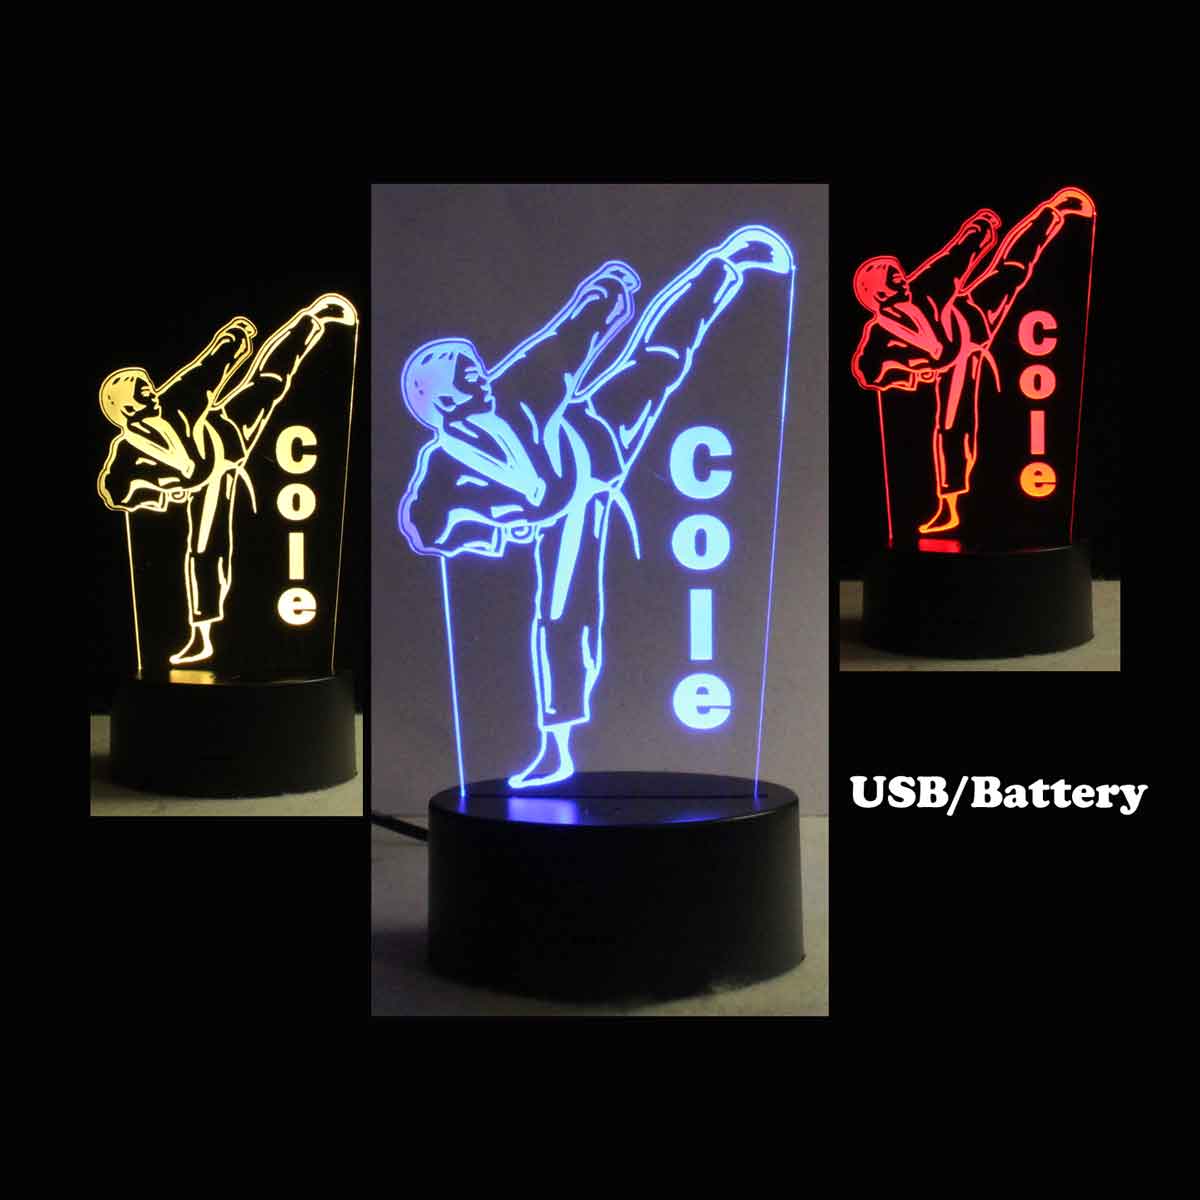 Karate Personalized USB/110V/240V battery operated Table Top night light